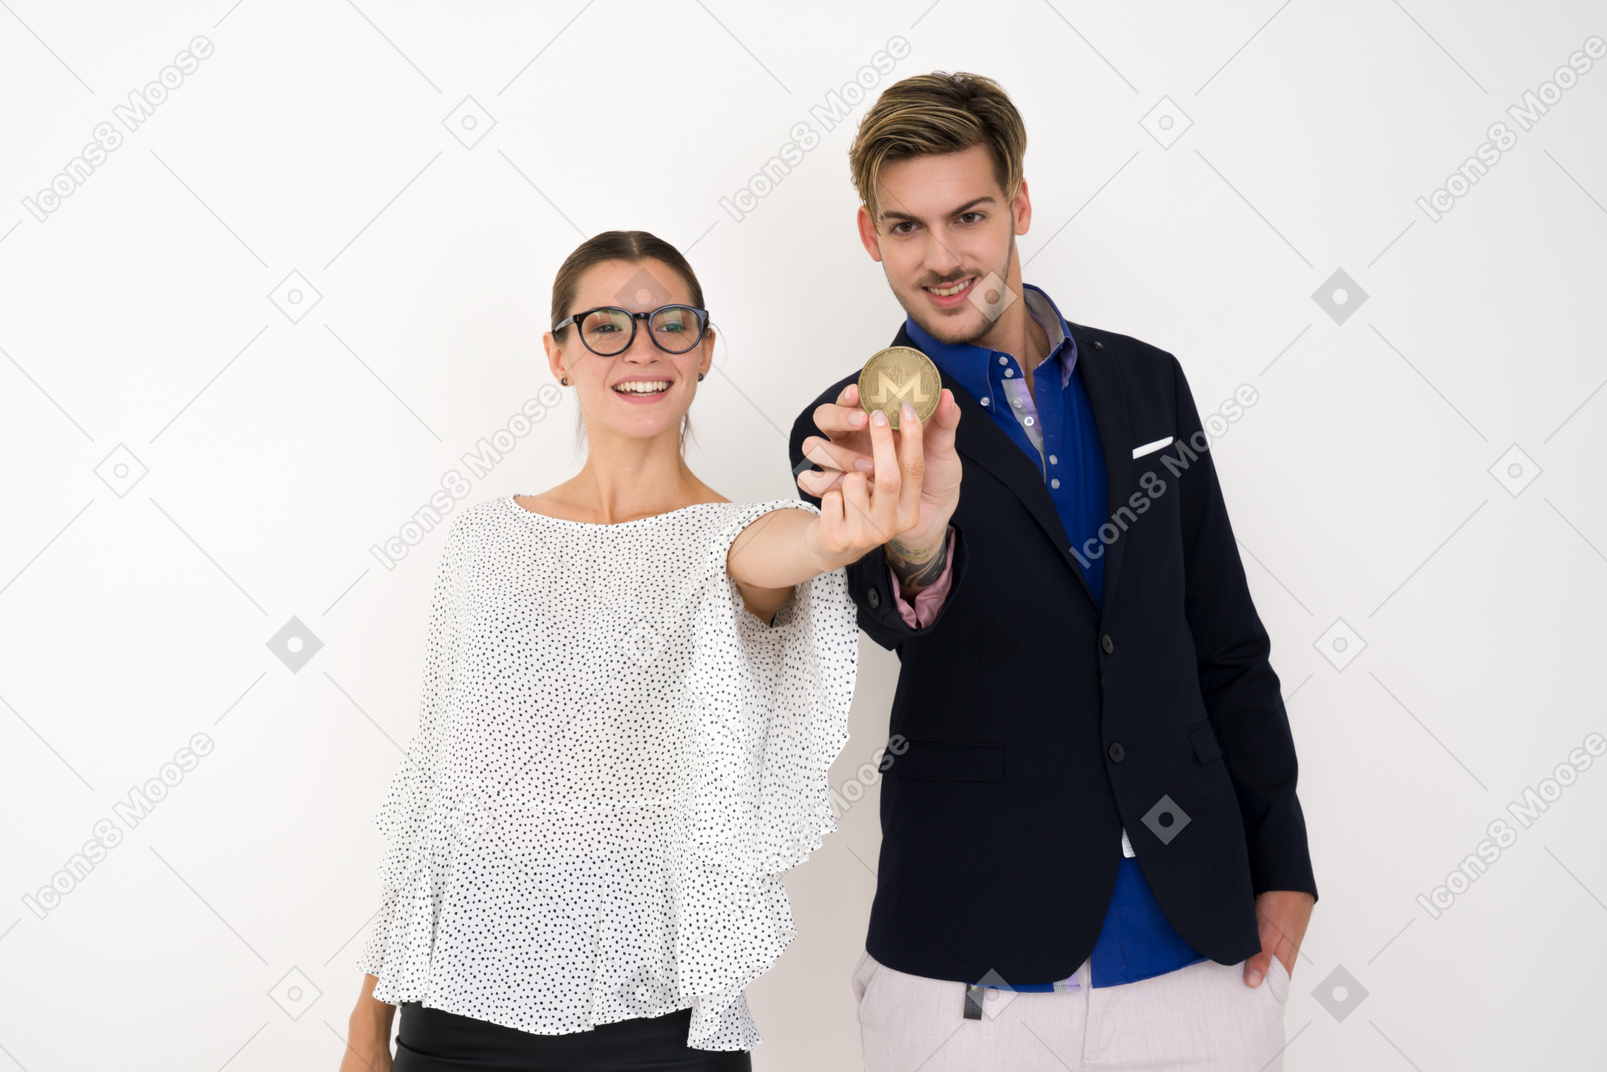 Attractive young man and woman holding a monero coin